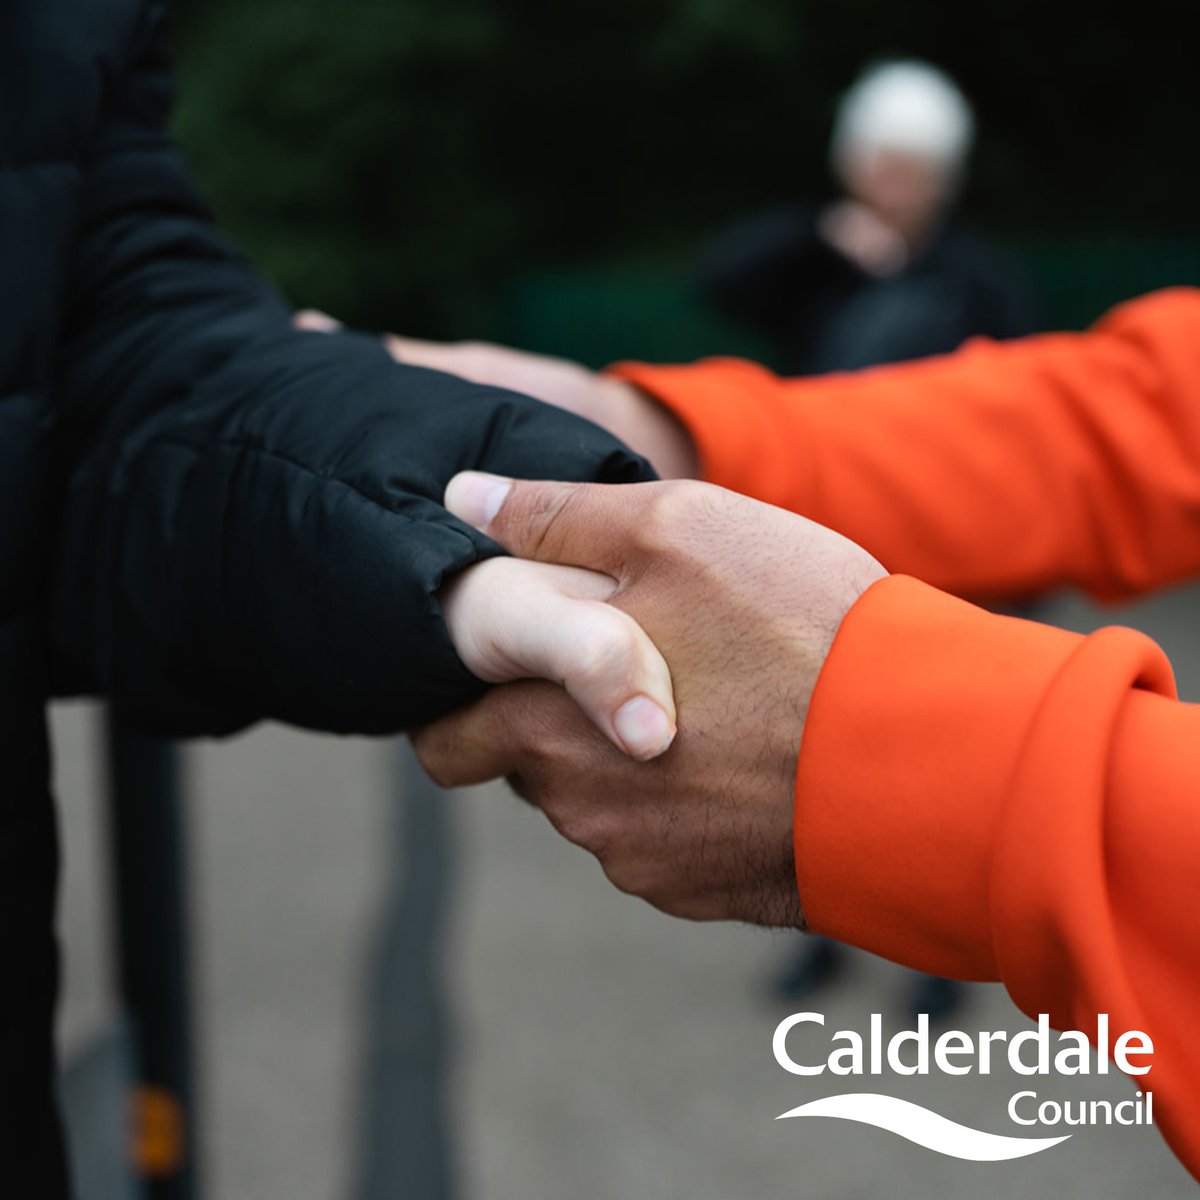 Community Cohesion is what must happen in all communities to enable different groups of people to get on well together. We're developing a new cohesion framework to help us build stronger communities in Calderdale. Find out more and have your say 👉 calderdale.citizenlab.co/en-GB/projects…